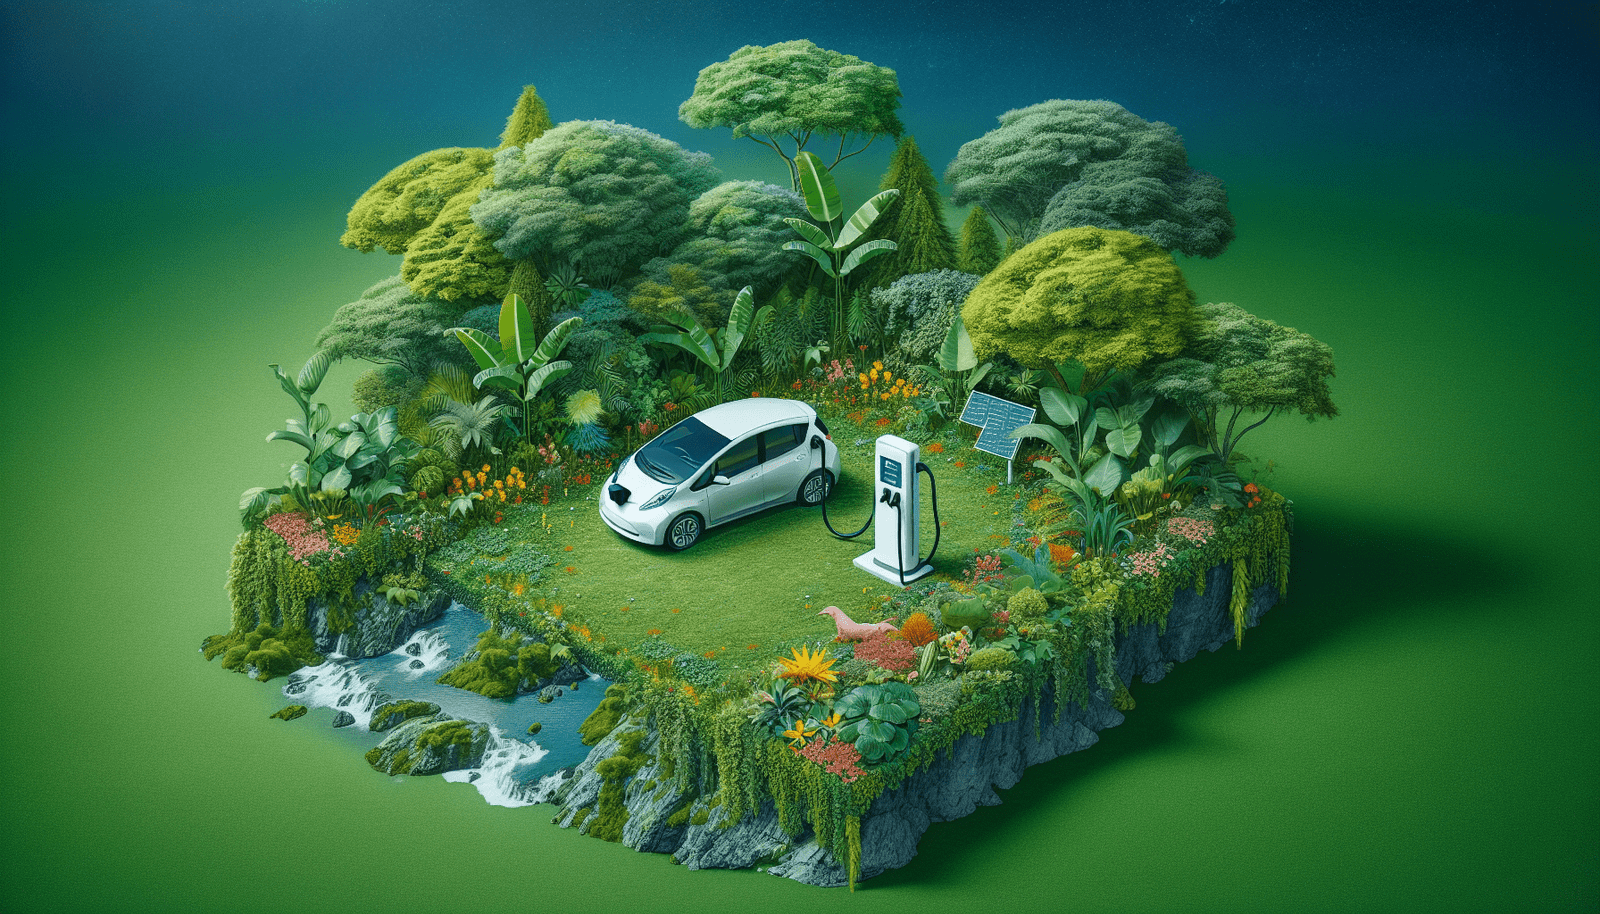 How Can Electric Vehicles Help Preserve Natural Habitats And Ecosystems?